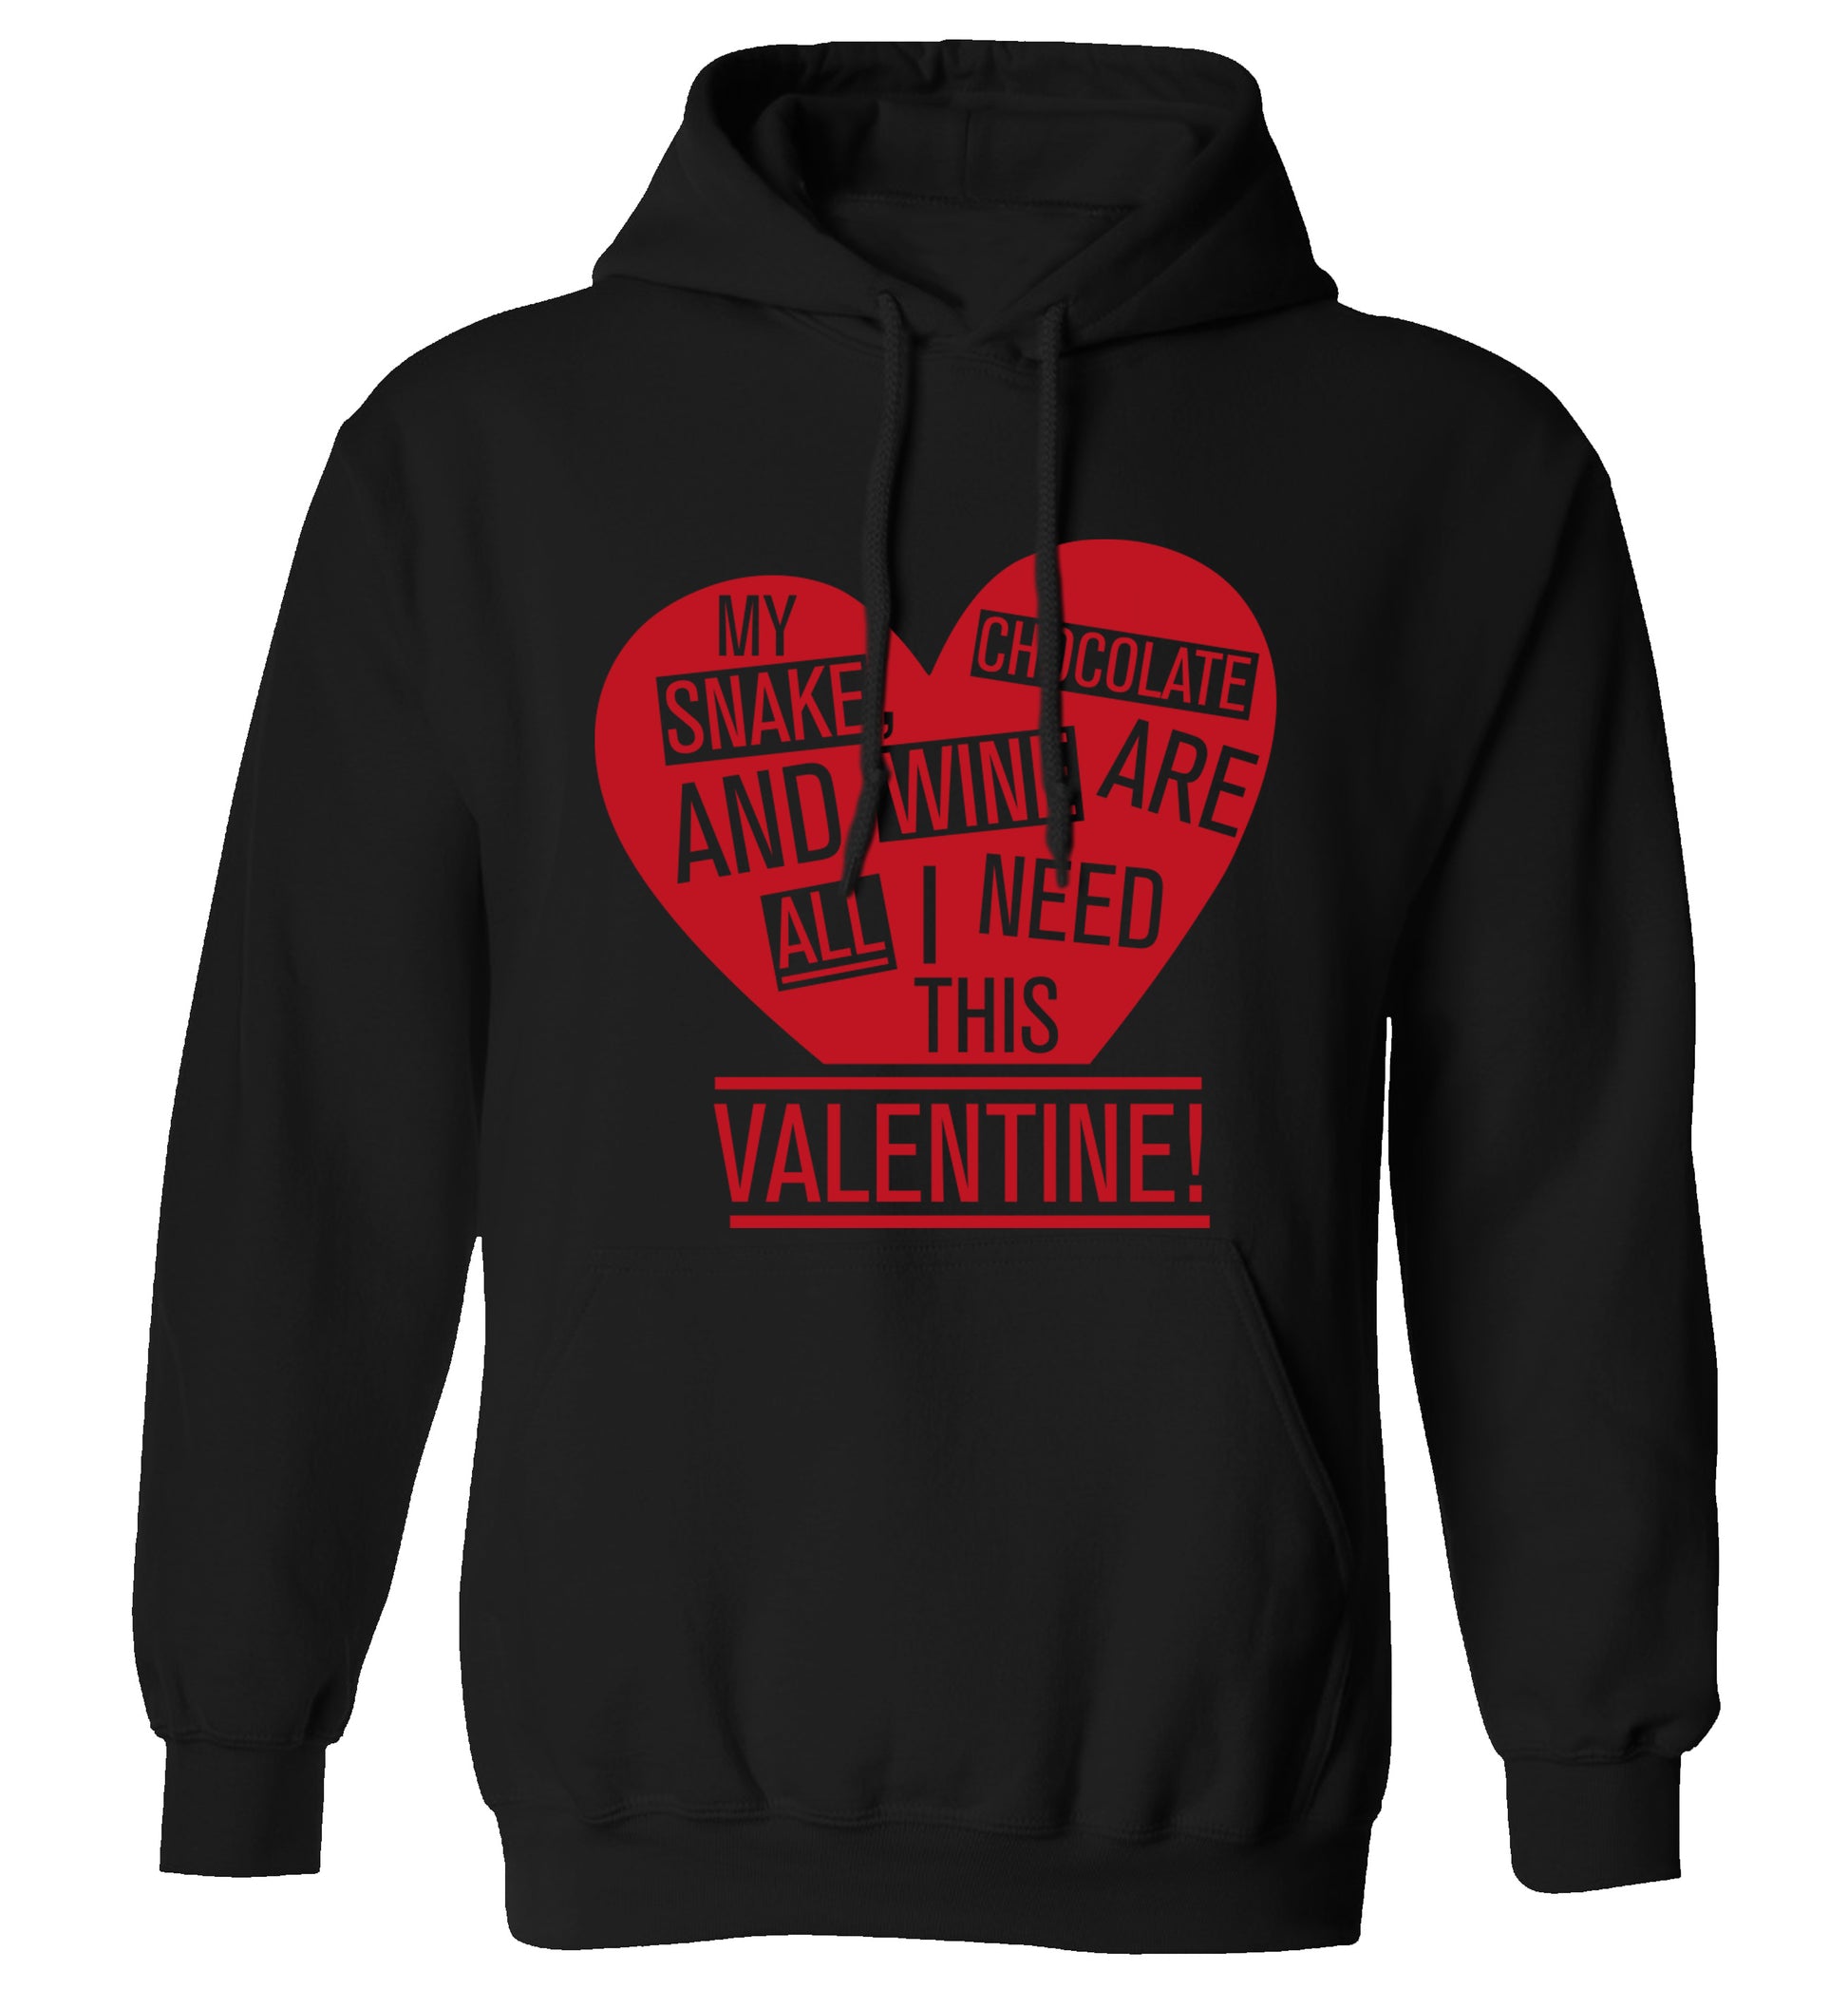 My snake, chocolate and wine are all I need this valentine! adults unisex black hoodie 2XL